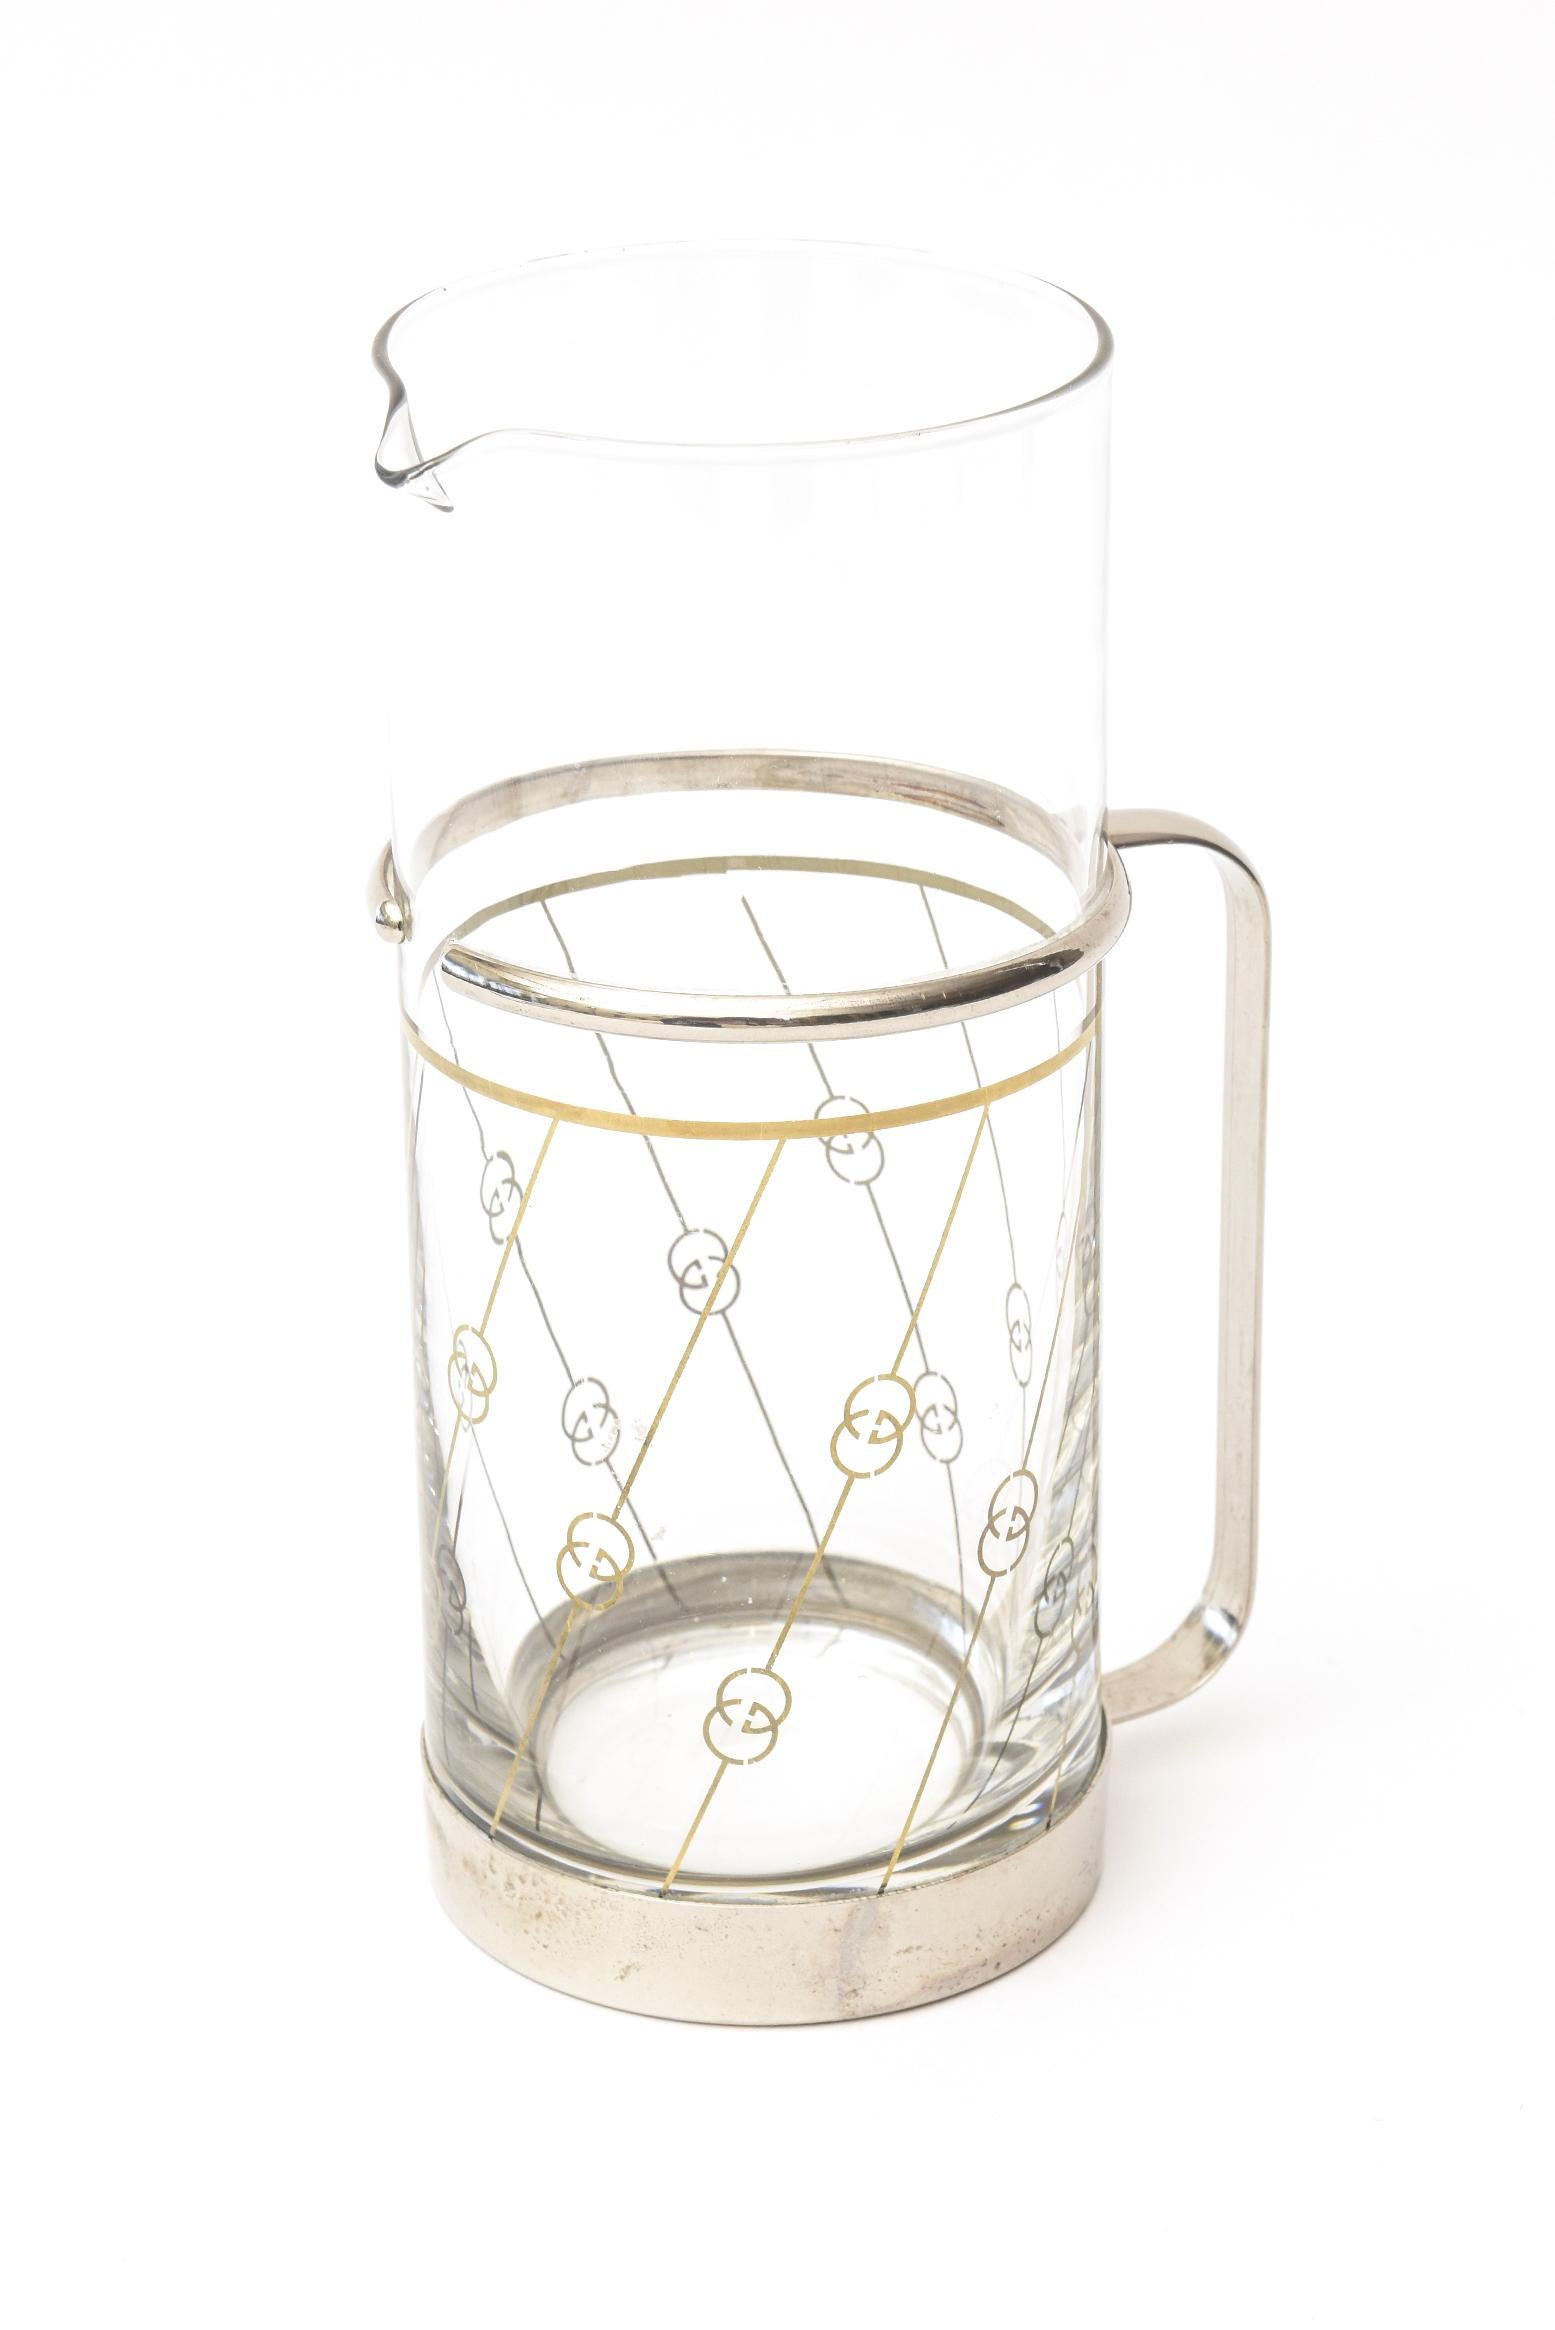 This Italian hallmarked Gucci martini pitcher is from the 1970s. It is silver plate and glass. It is marked Gucci Marked in Italy. It is so chic. Great barware.